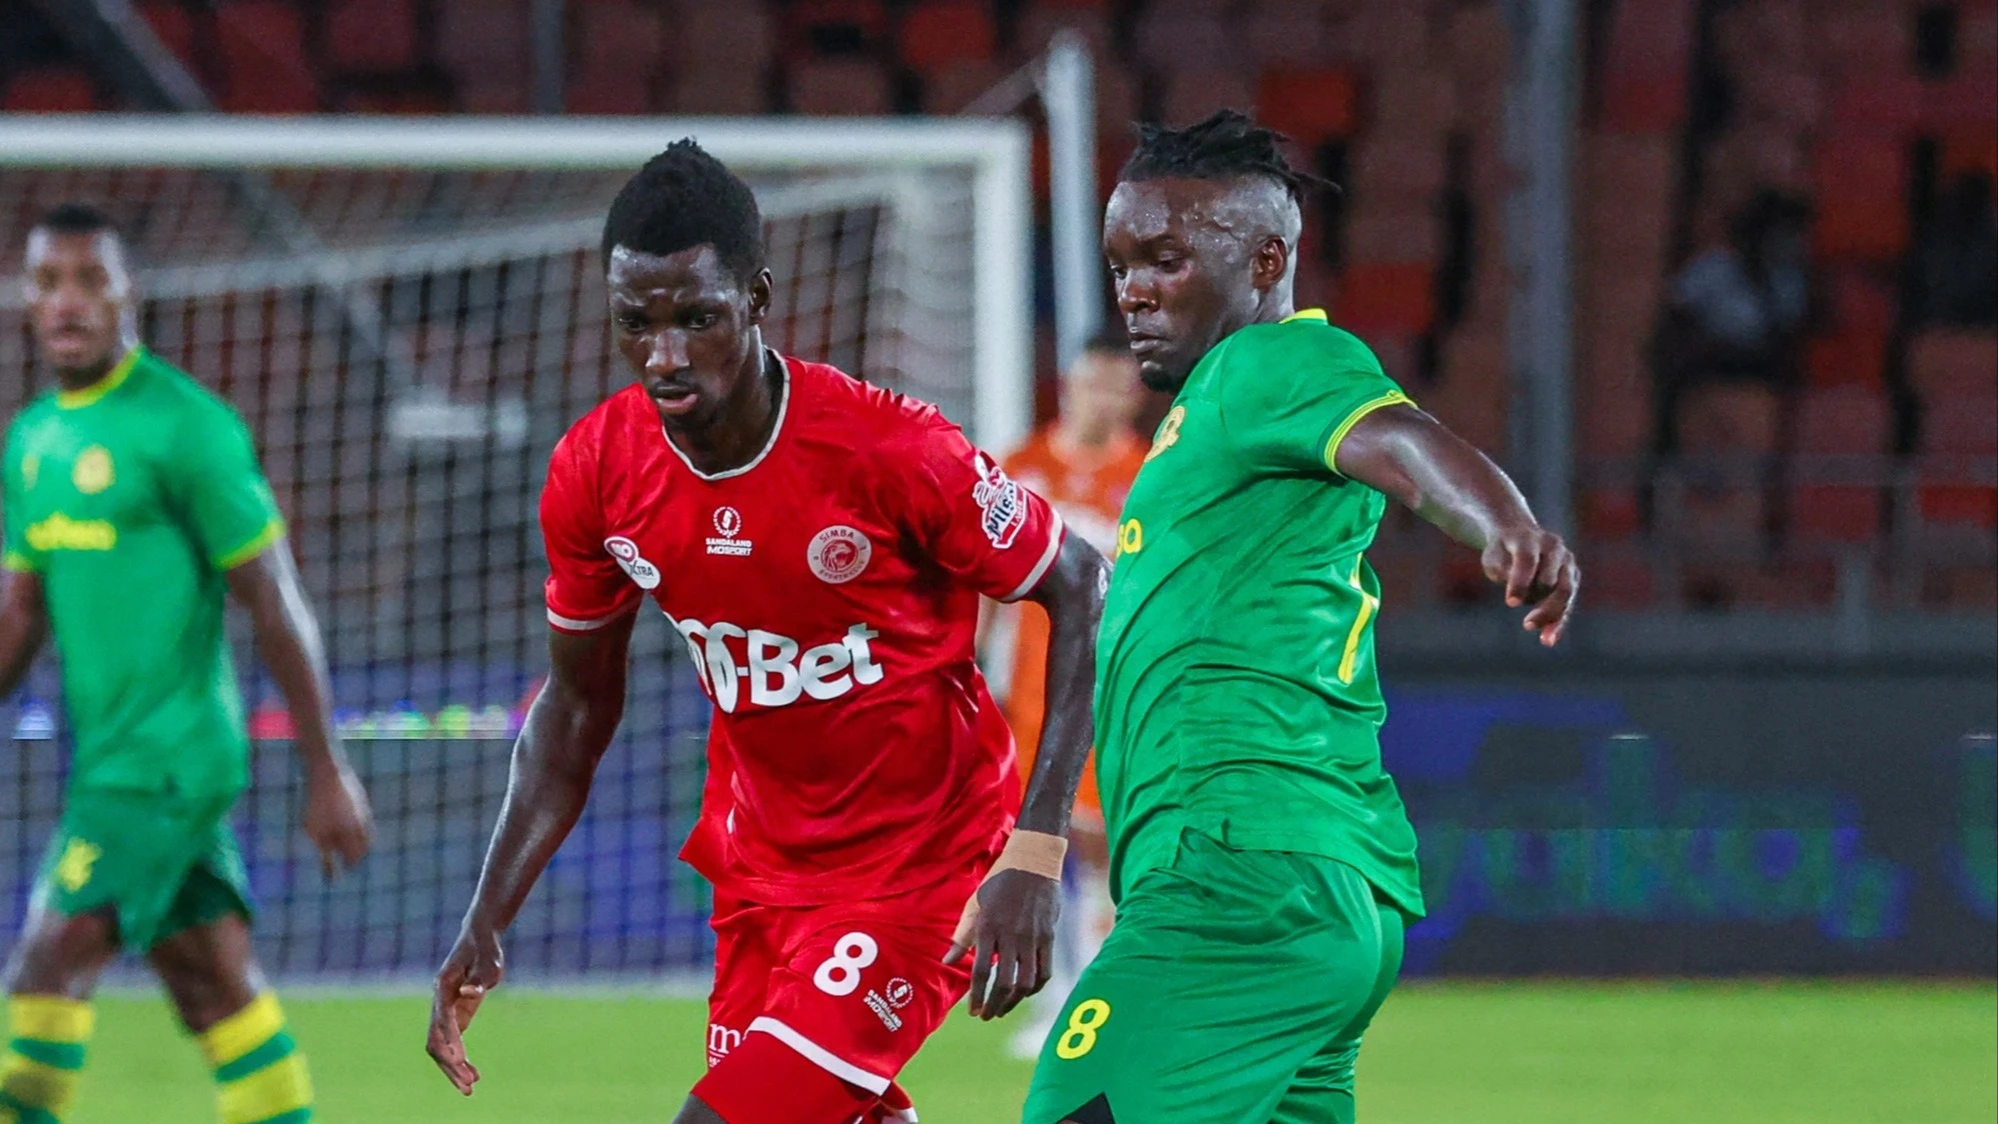 Yanga's defensive midfielder, Khalid Aucho (R), challenges Simba SC's midfielder Sadio Kanouté (C) as the former's teammate Joseph Guédé looks on when the squads locked horns in a 2023/24 NBC Premier League match which took place in Dar es Salaam 